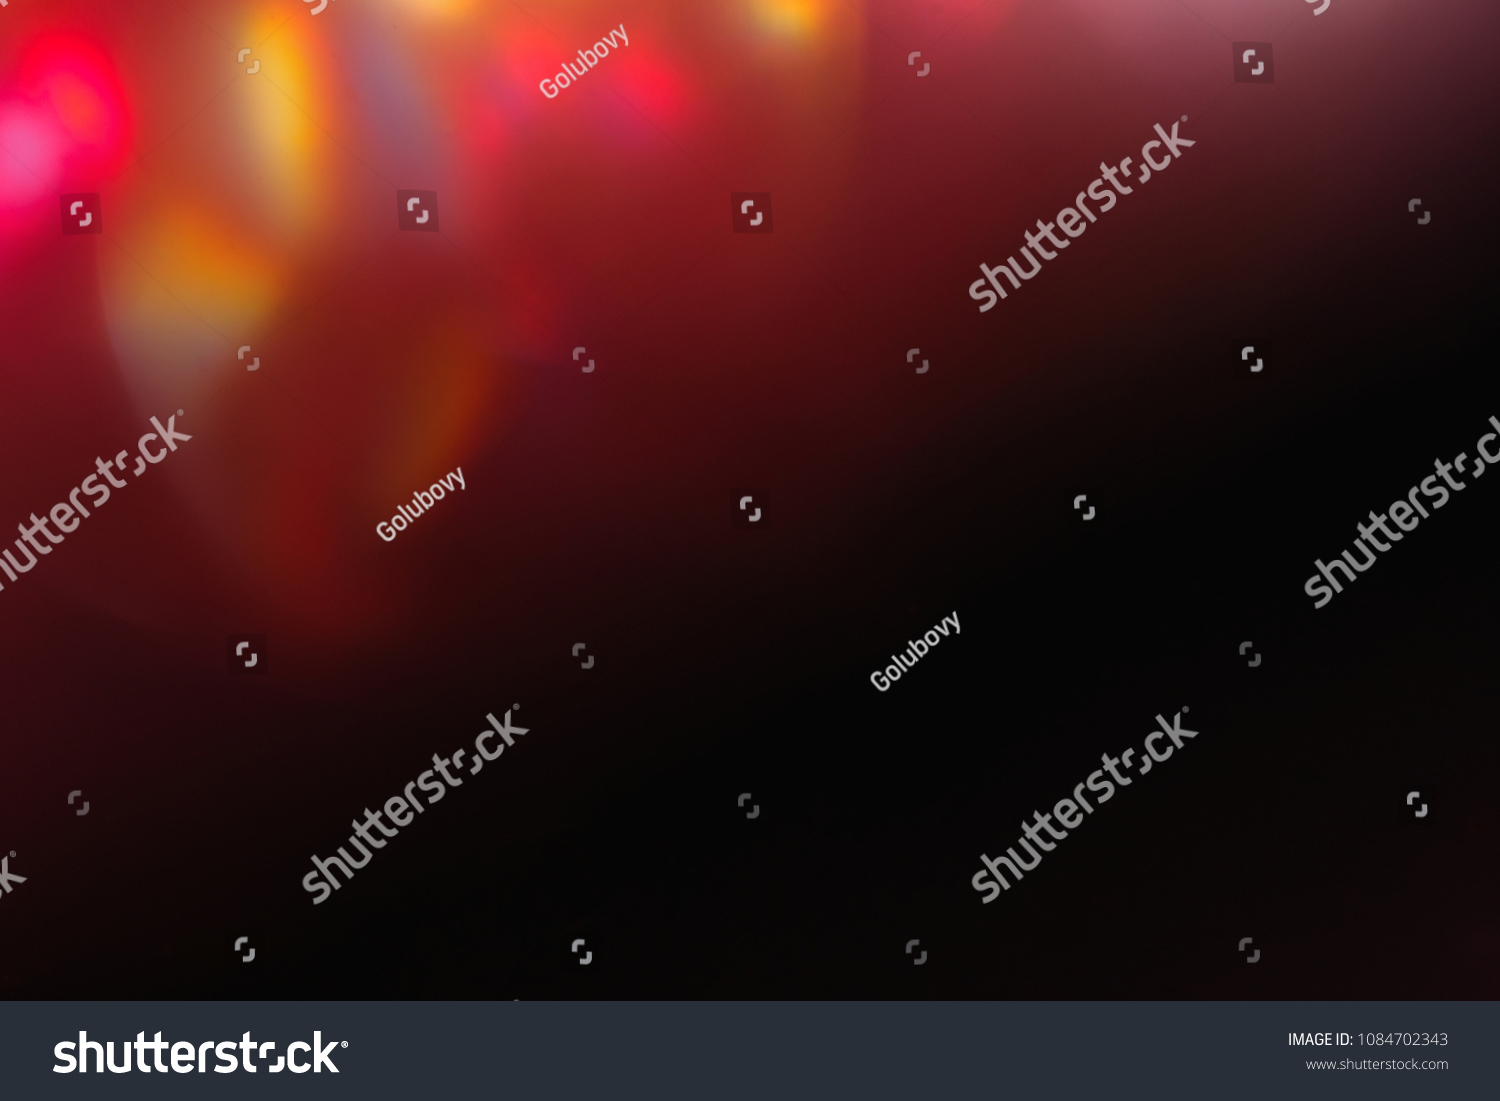 soft light. lens flare. abstract shine. arty simple red black background #1084702343